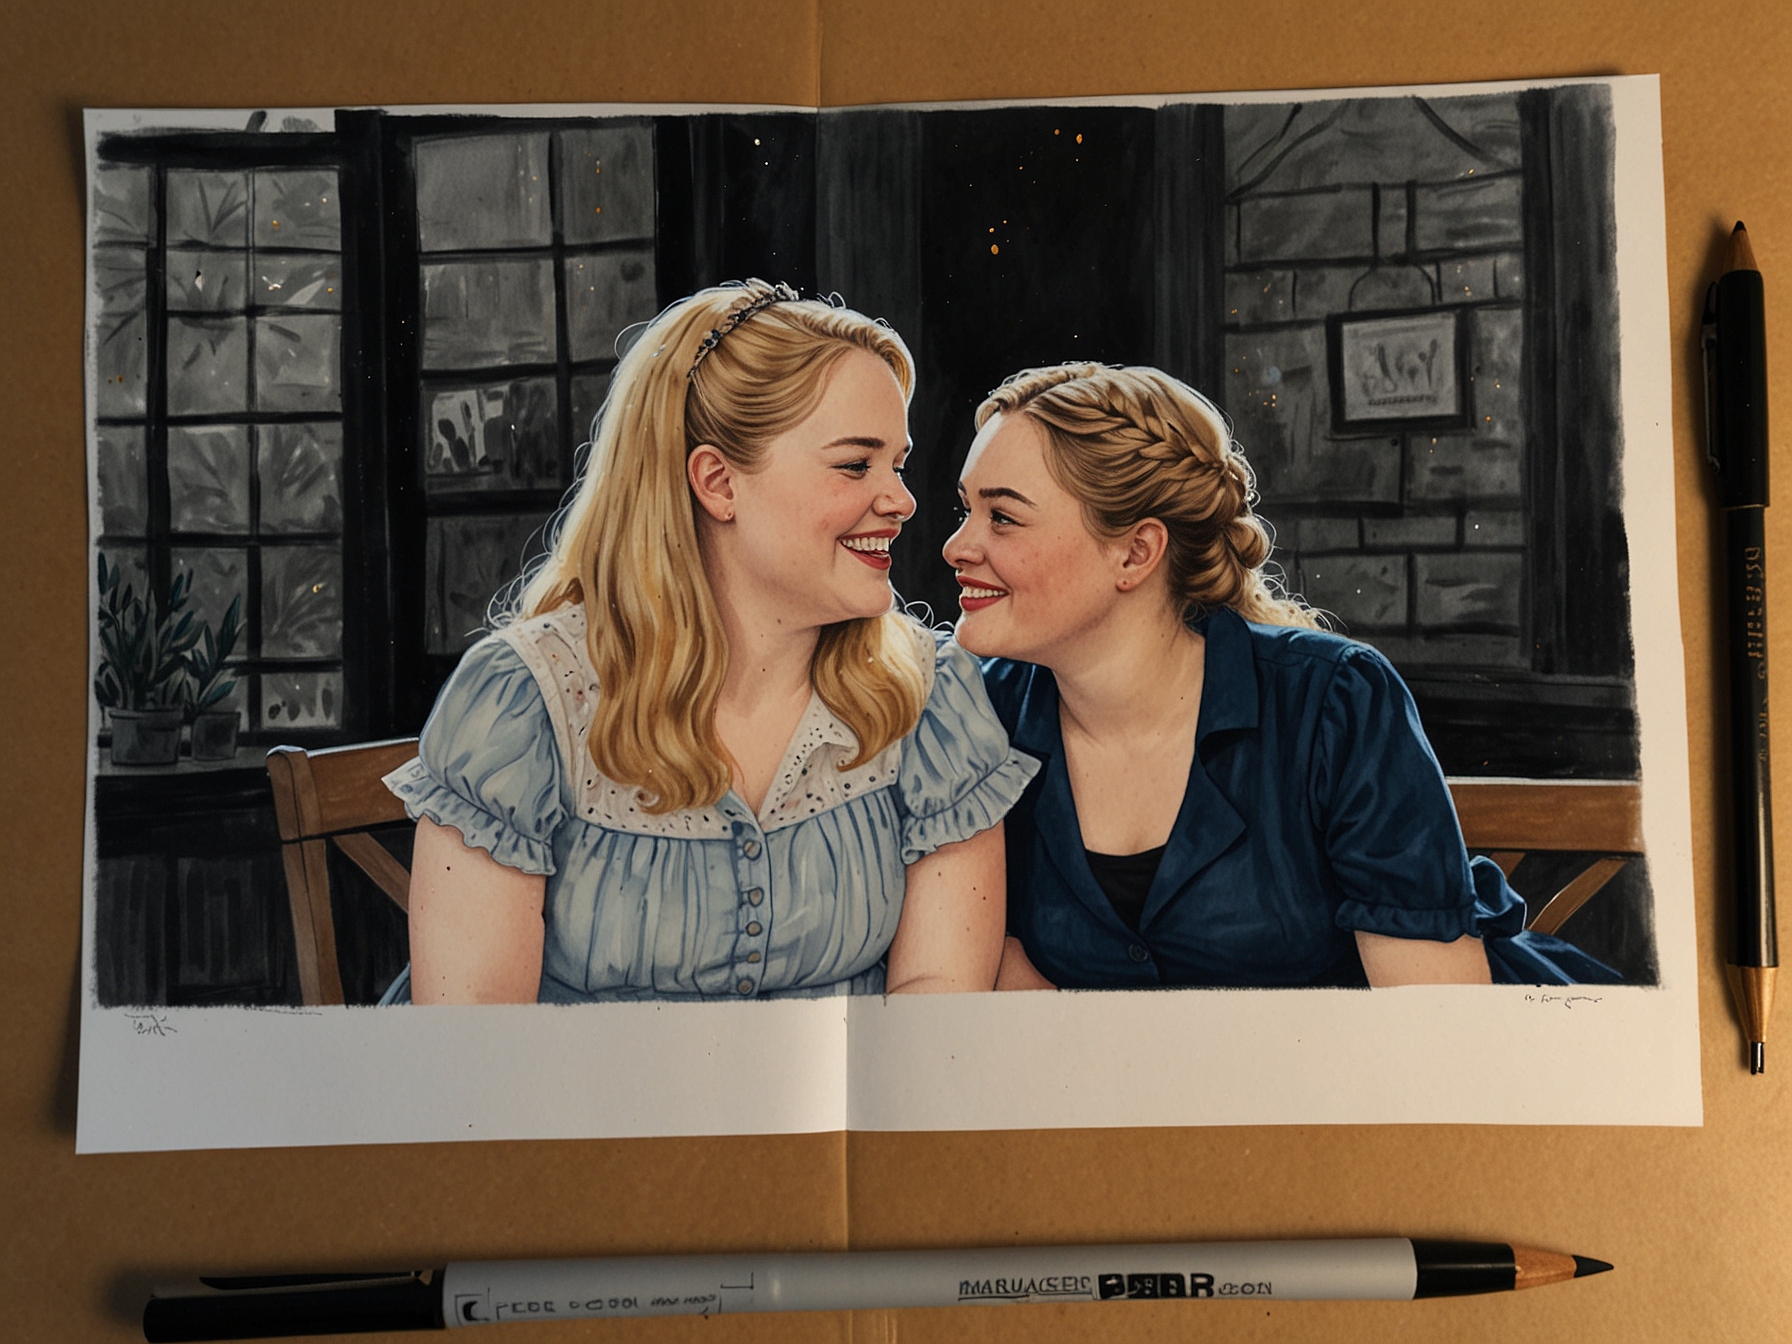 Simone Ashley and Nicola Coughlan, stars of 'Bridgerton,' share a supportive moment on set. Their friendship illustrates the strong bonds formed behind the scenes amid public scrutiny.